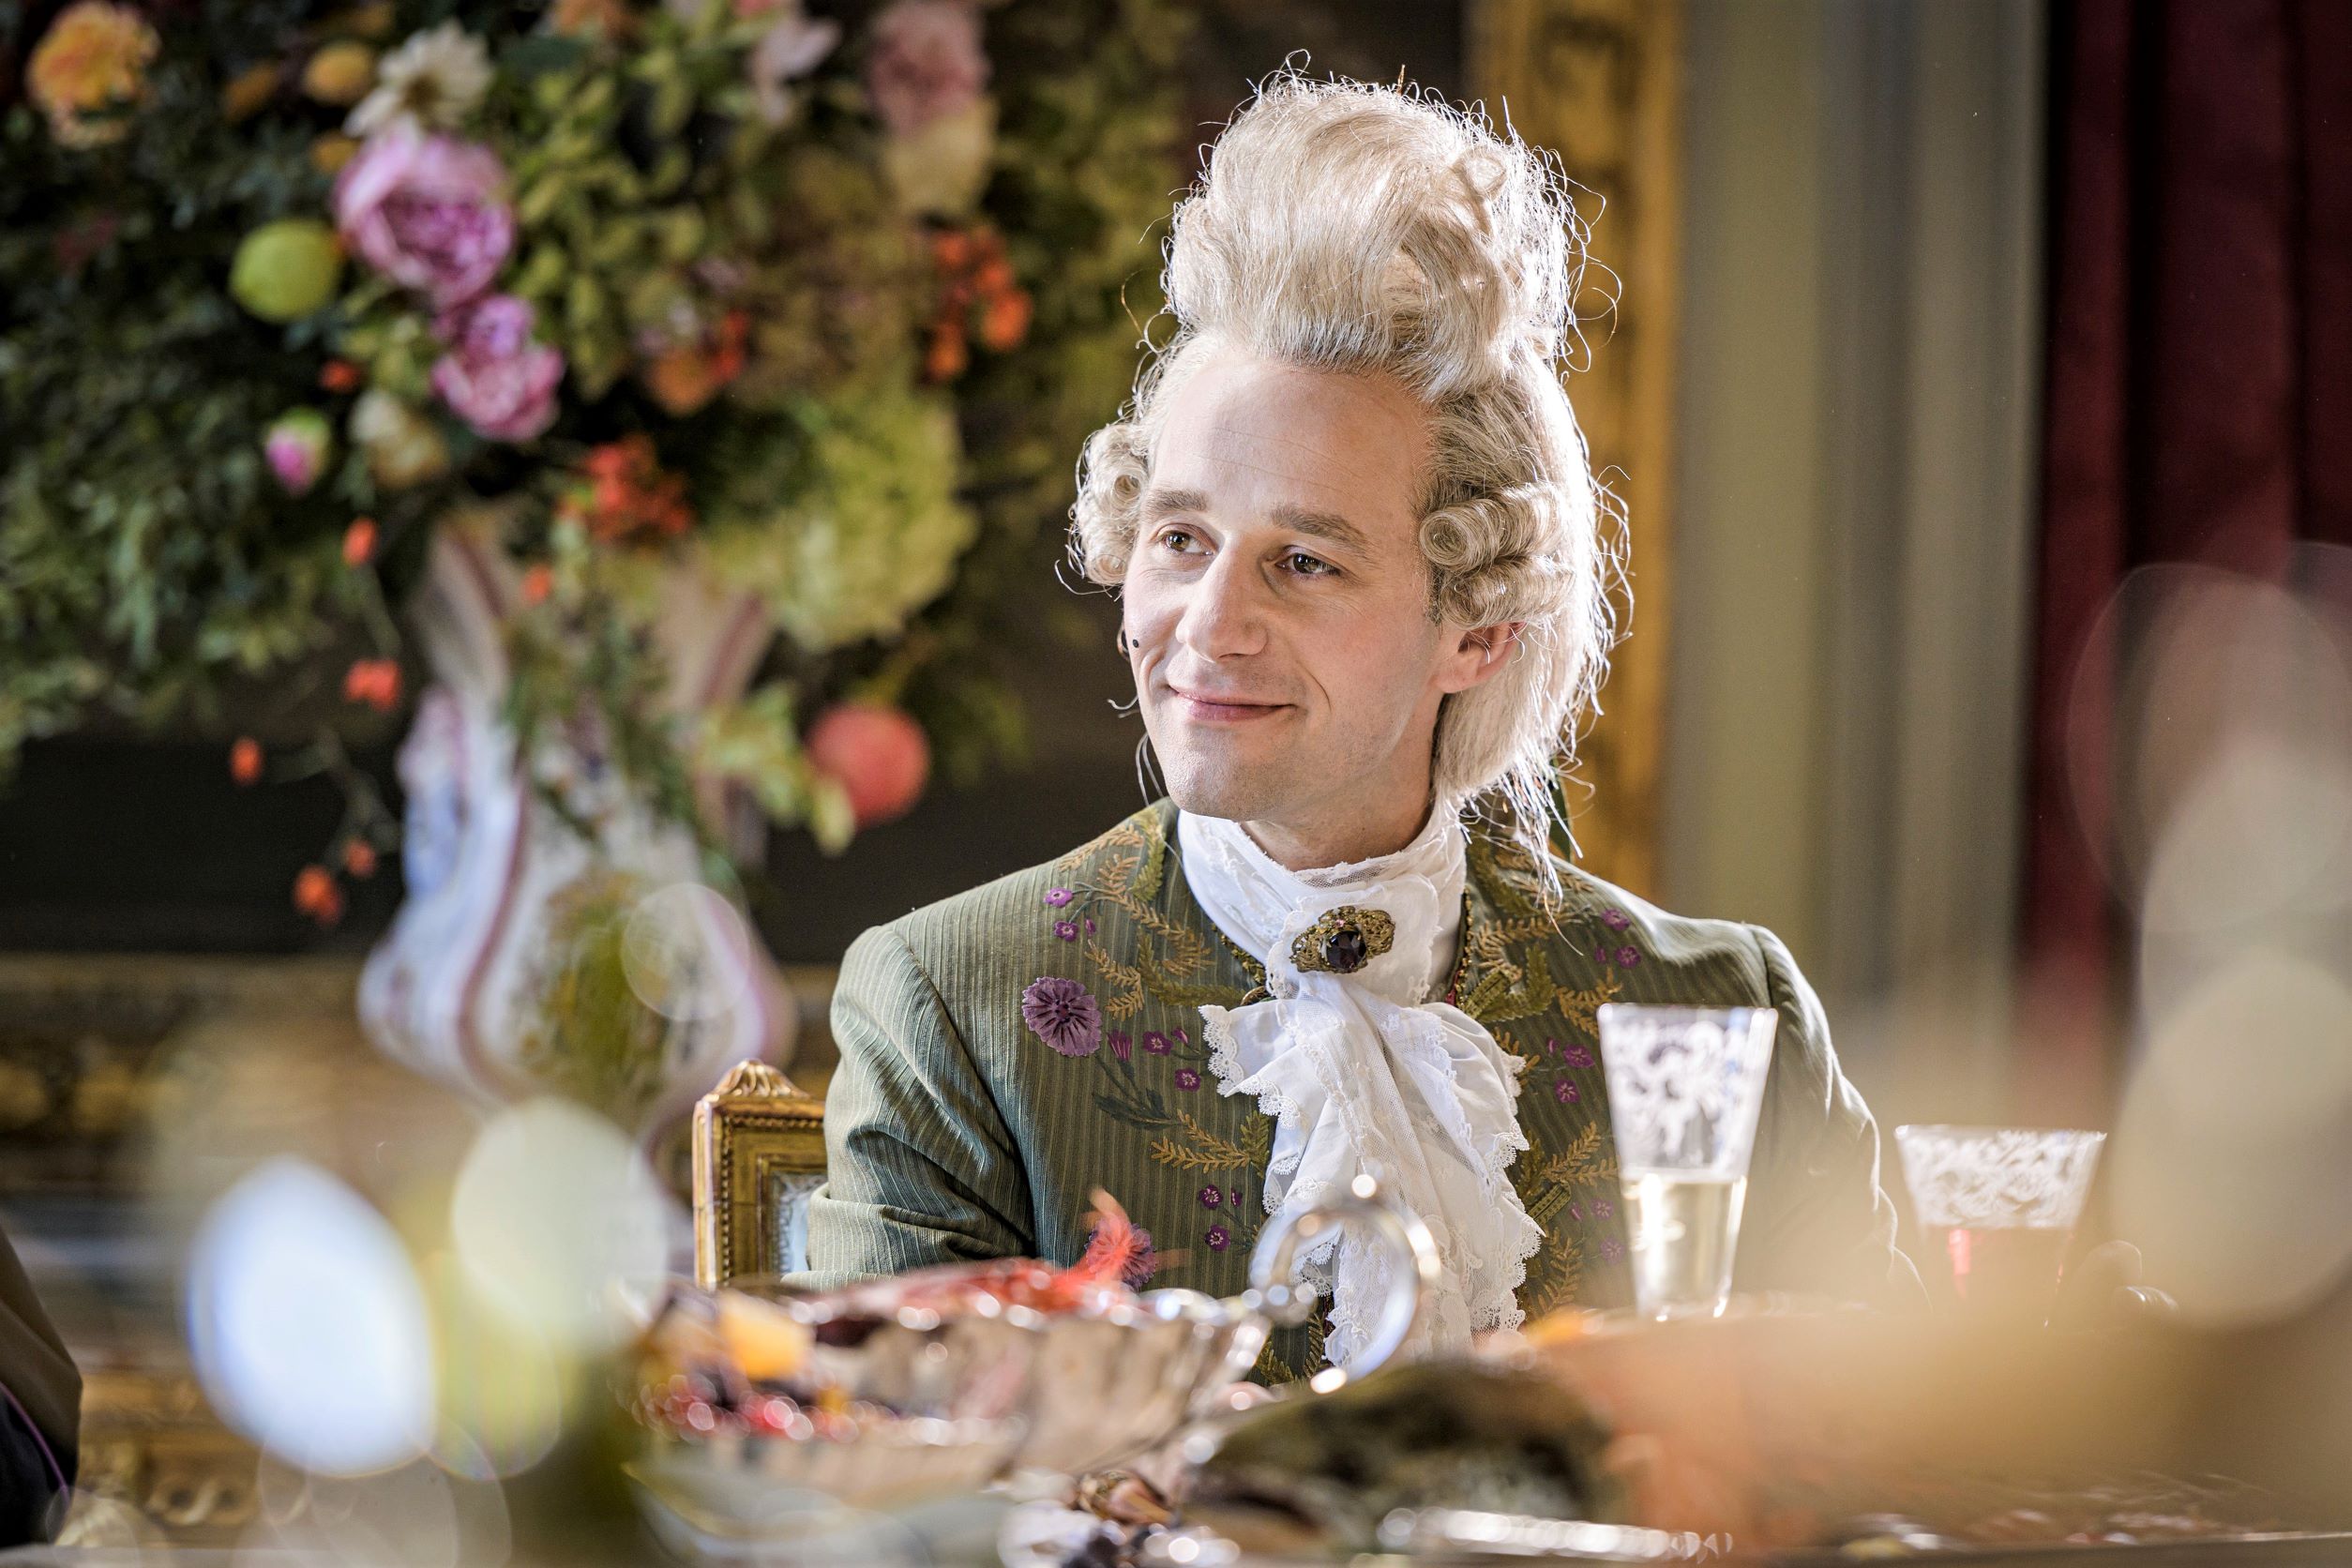 Benjamin Lavernhe as the Duke of Chamfort. in the film Delicieux (Delicious)